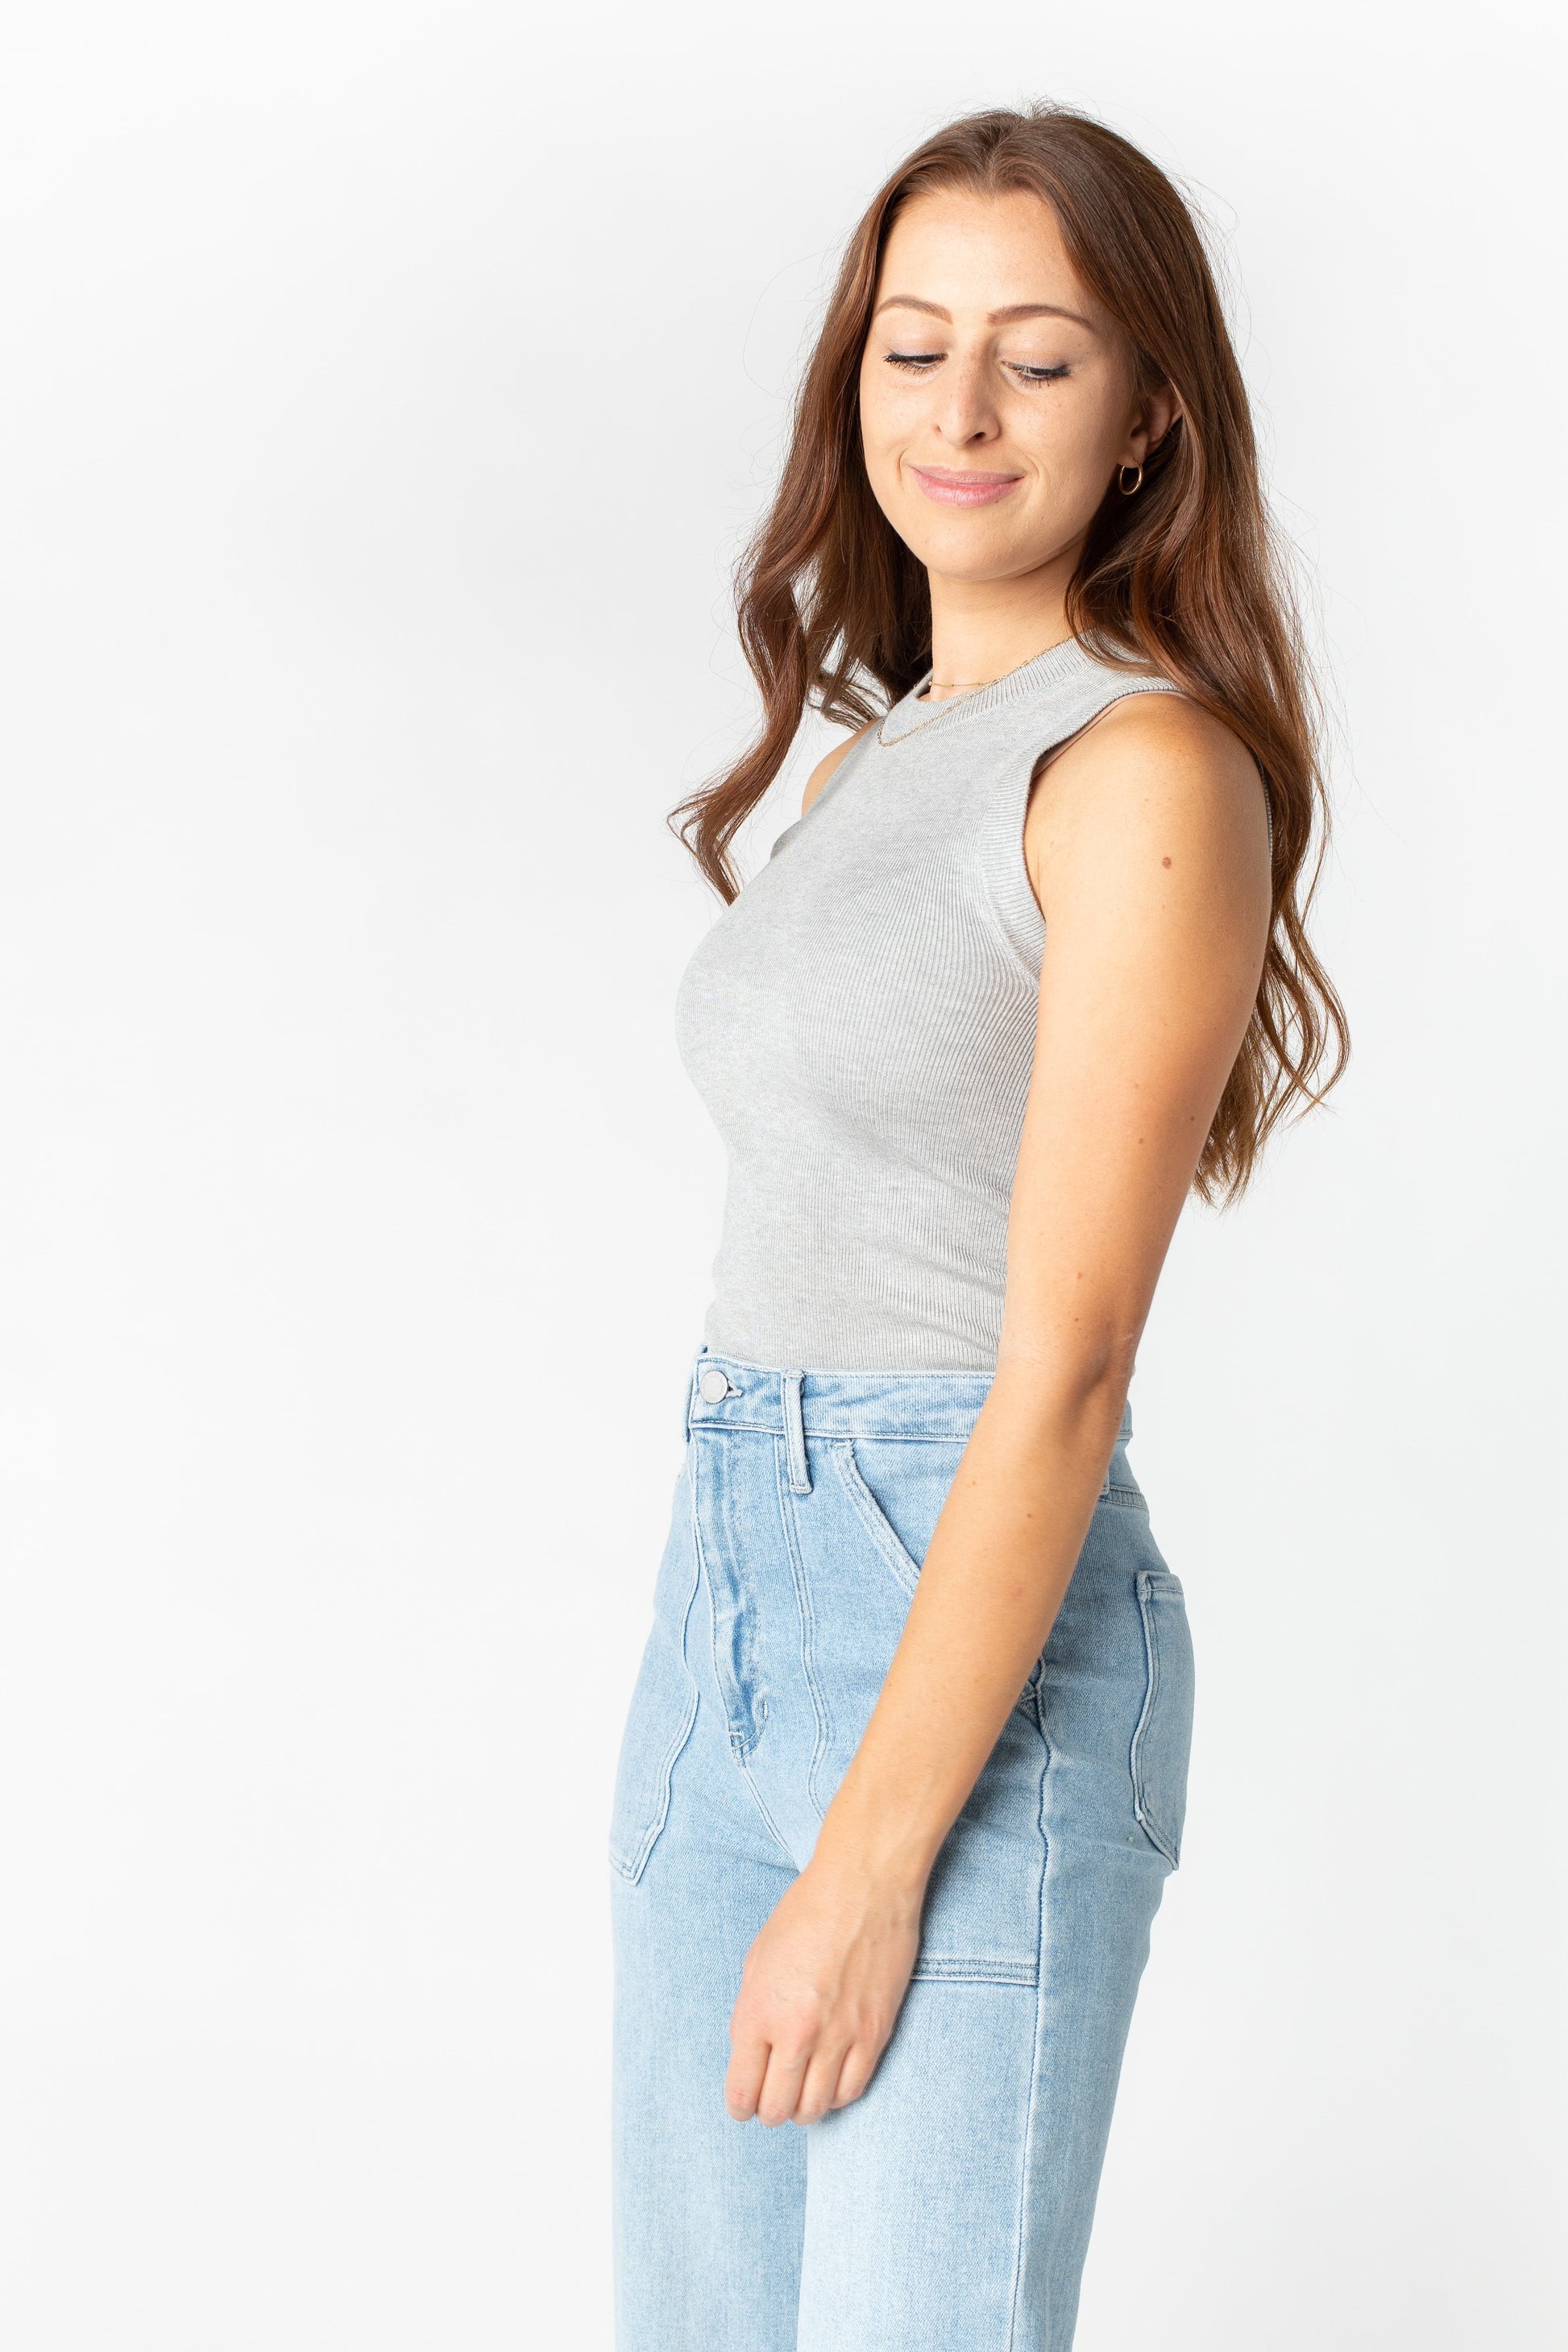 Dressed Up Knit Layering Tank - Heather Grey WOMEN'S TANK TOP Be Cool 